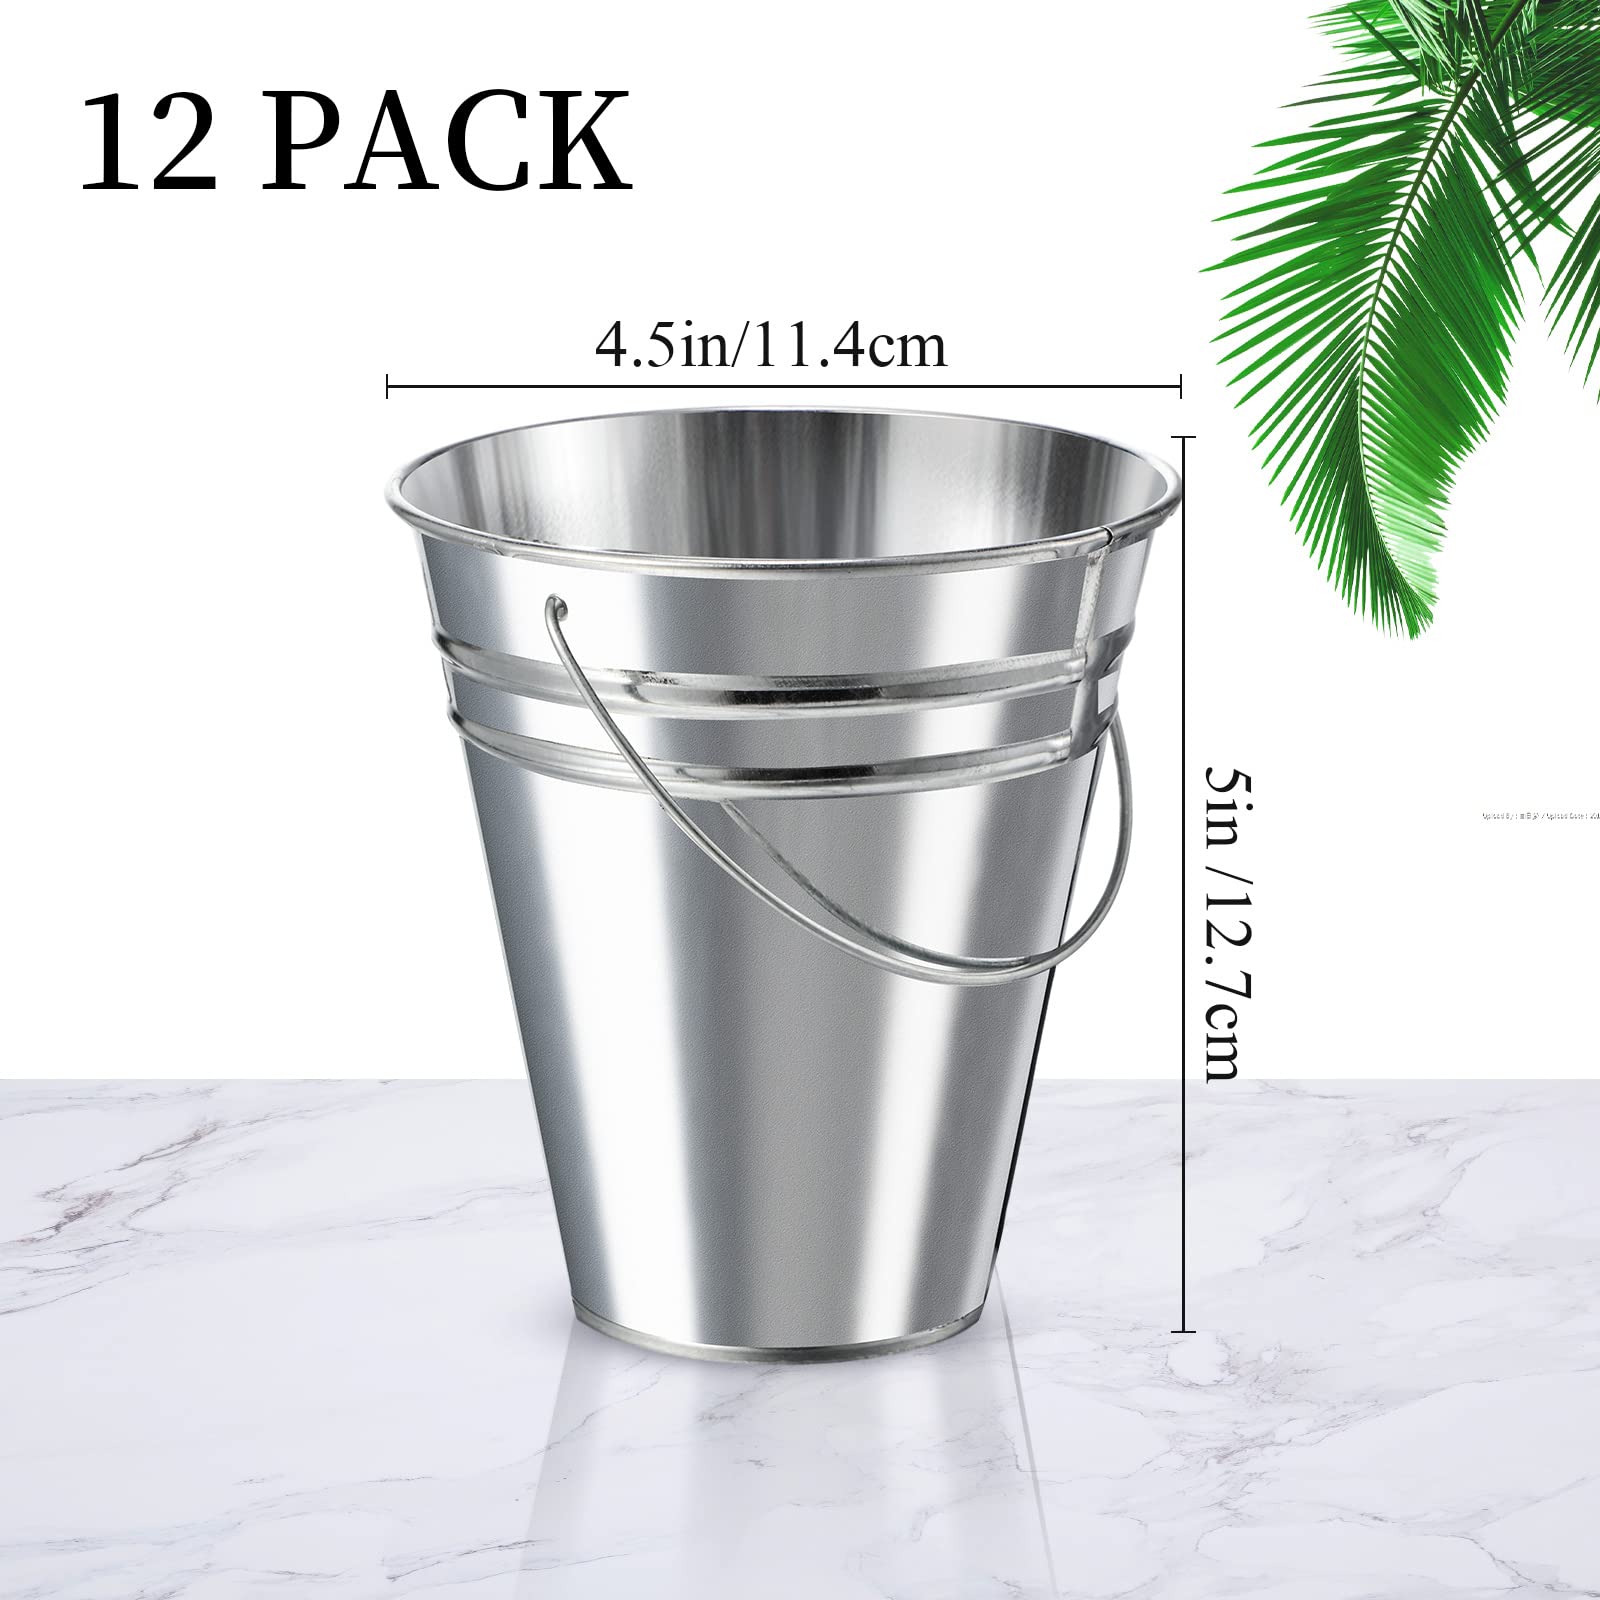 Sadnyy 12 Pack Metal Buckets with Handle, Galvanized Bucket 4.5 x 5 Inch Basket Bucket for Kids, Kids Party Supplies, Crafts for Christmas Halloween Christmas Candy Bars Vase Crafts(Silver)